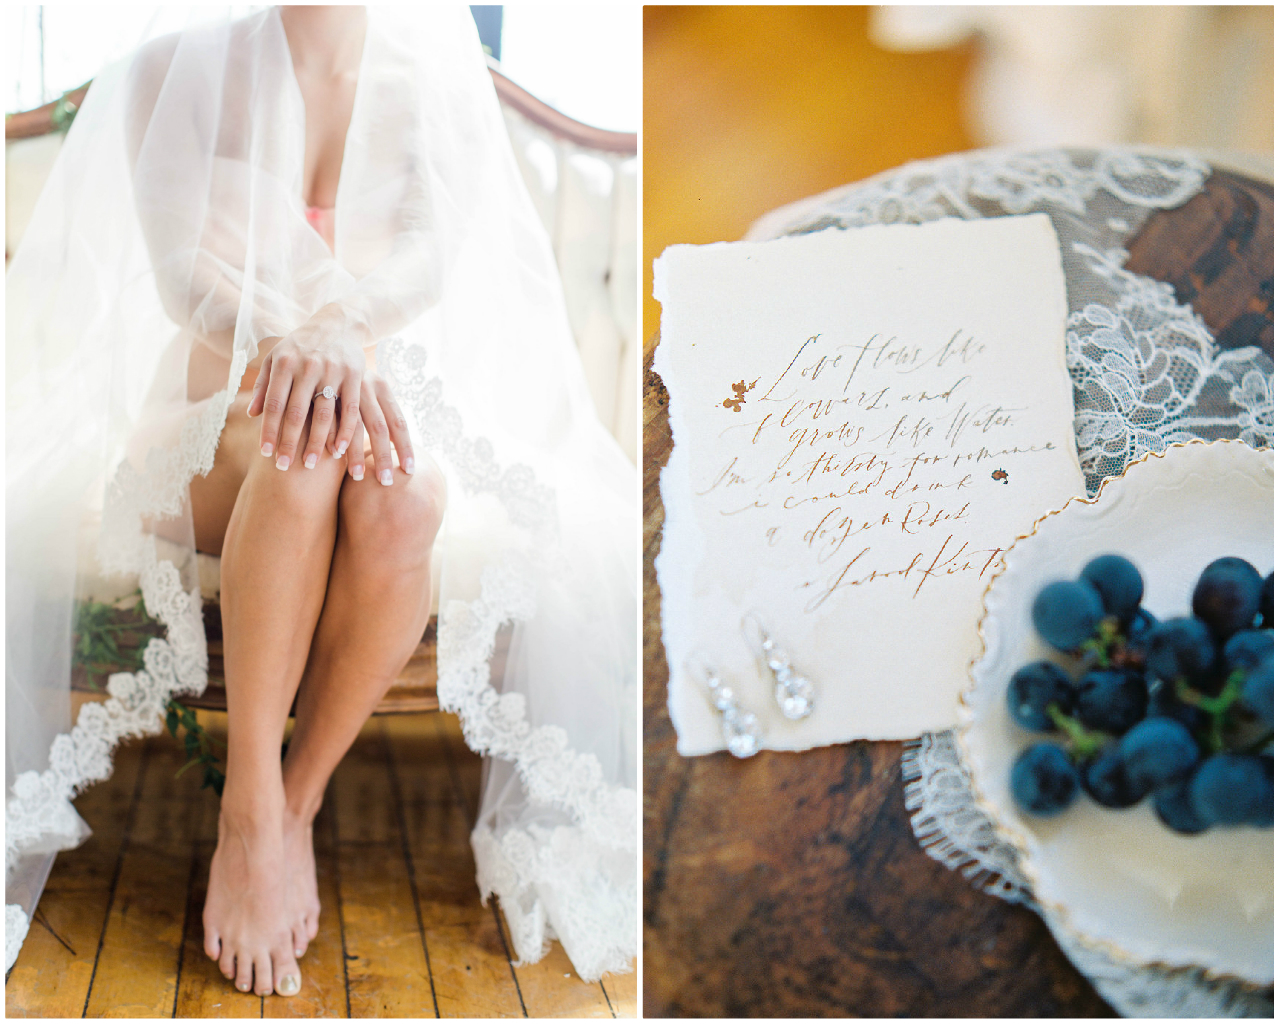 Grand Rapids Boudior | The Day's Design | Ashley Slater Photography